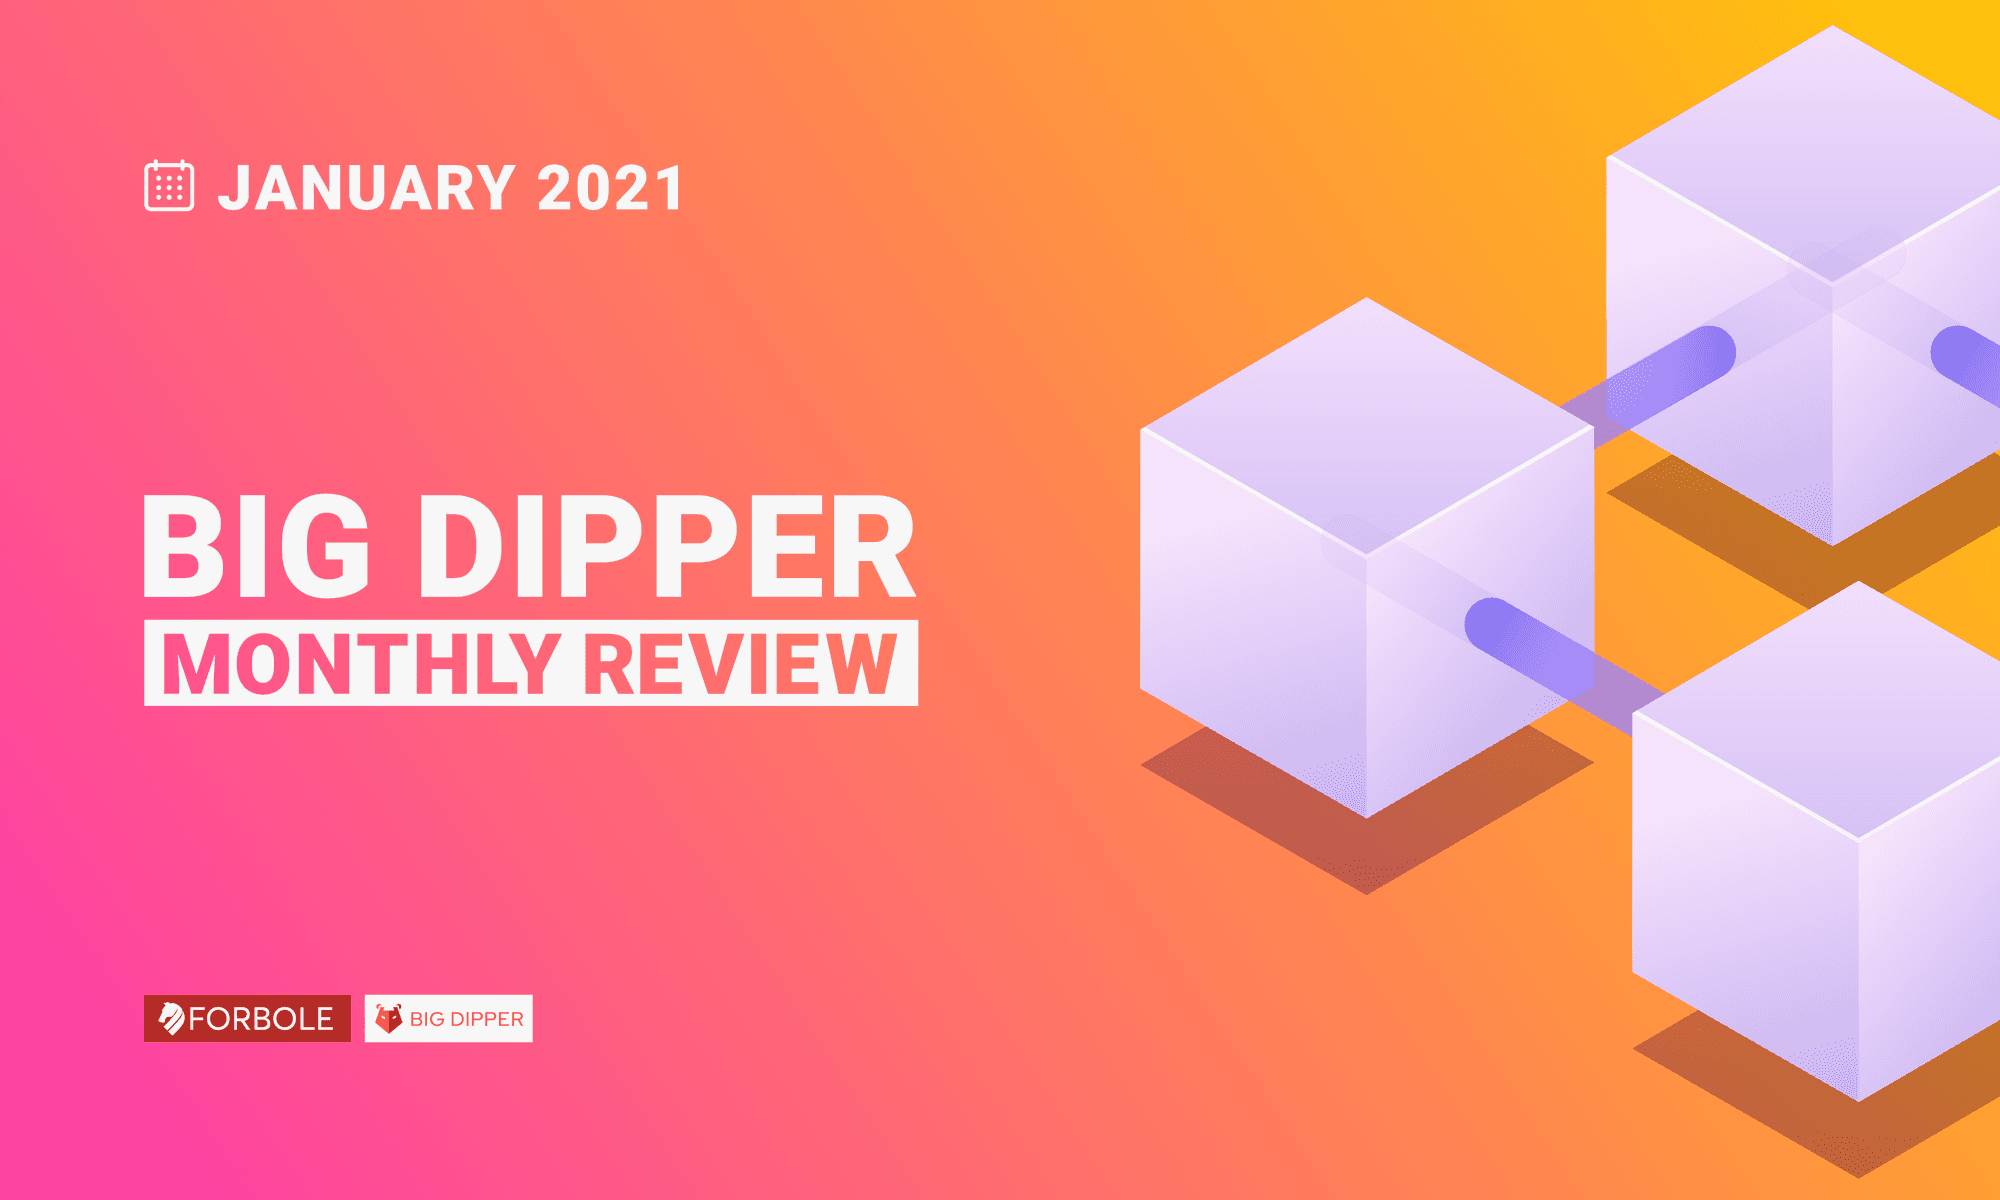 Big Dipper Monthly Review - January 2021